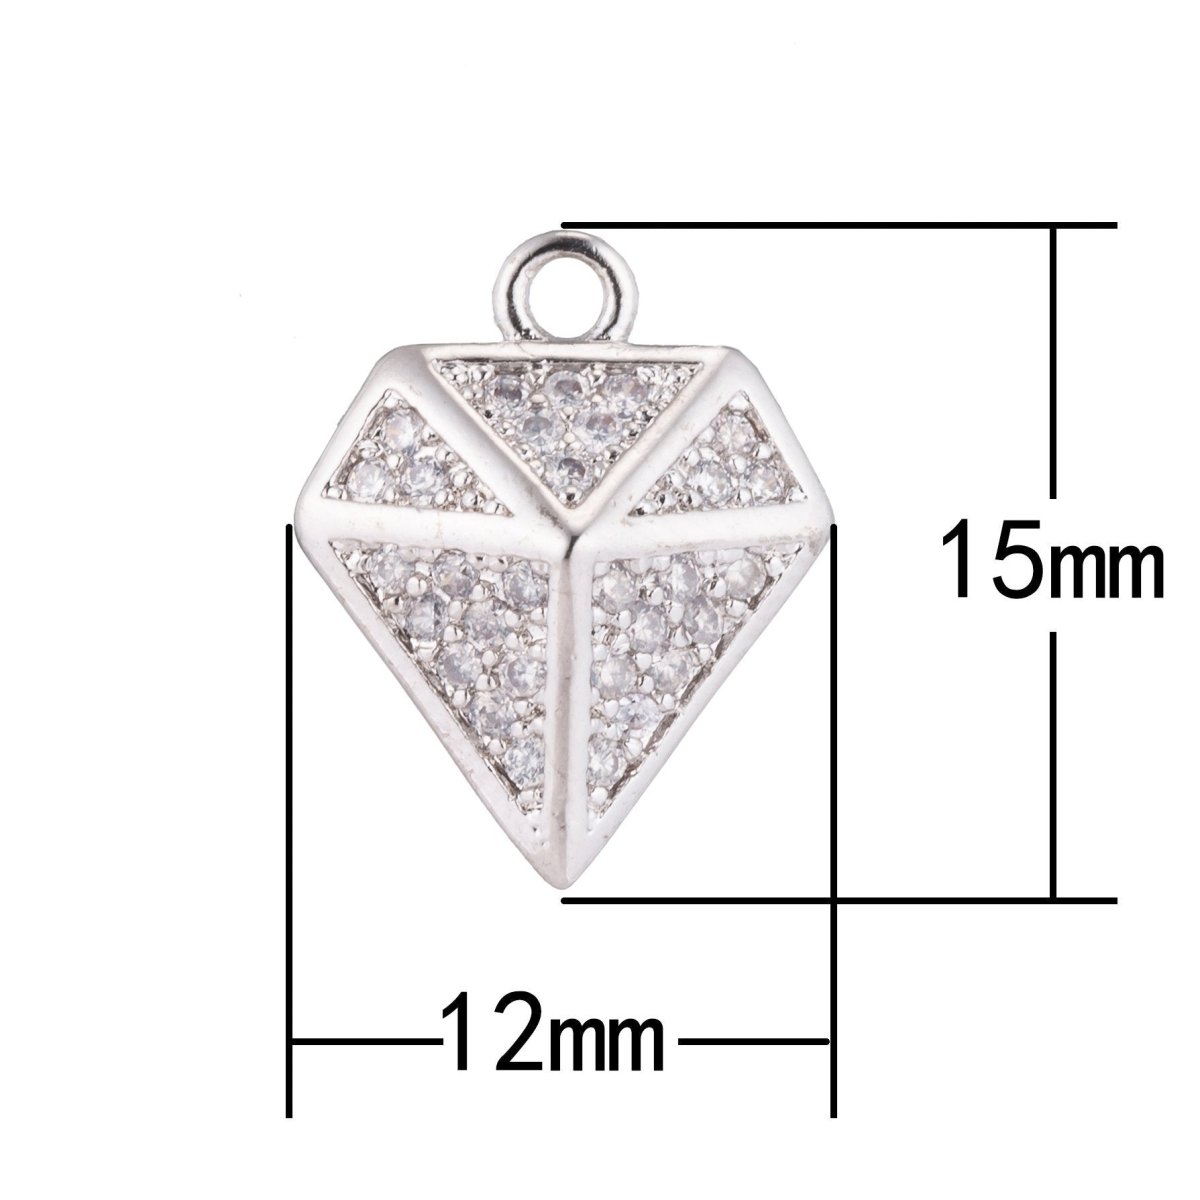 On Sale! CLEARANCE! 18K Gold Filled / White Gold Filled Cute Diamond Shape Charms, Dainty Dangle, Cubic Zirconia Bracelet Charm, Necklace Pendant, Findings for Jewelry Making | C-216 - DLUXCA